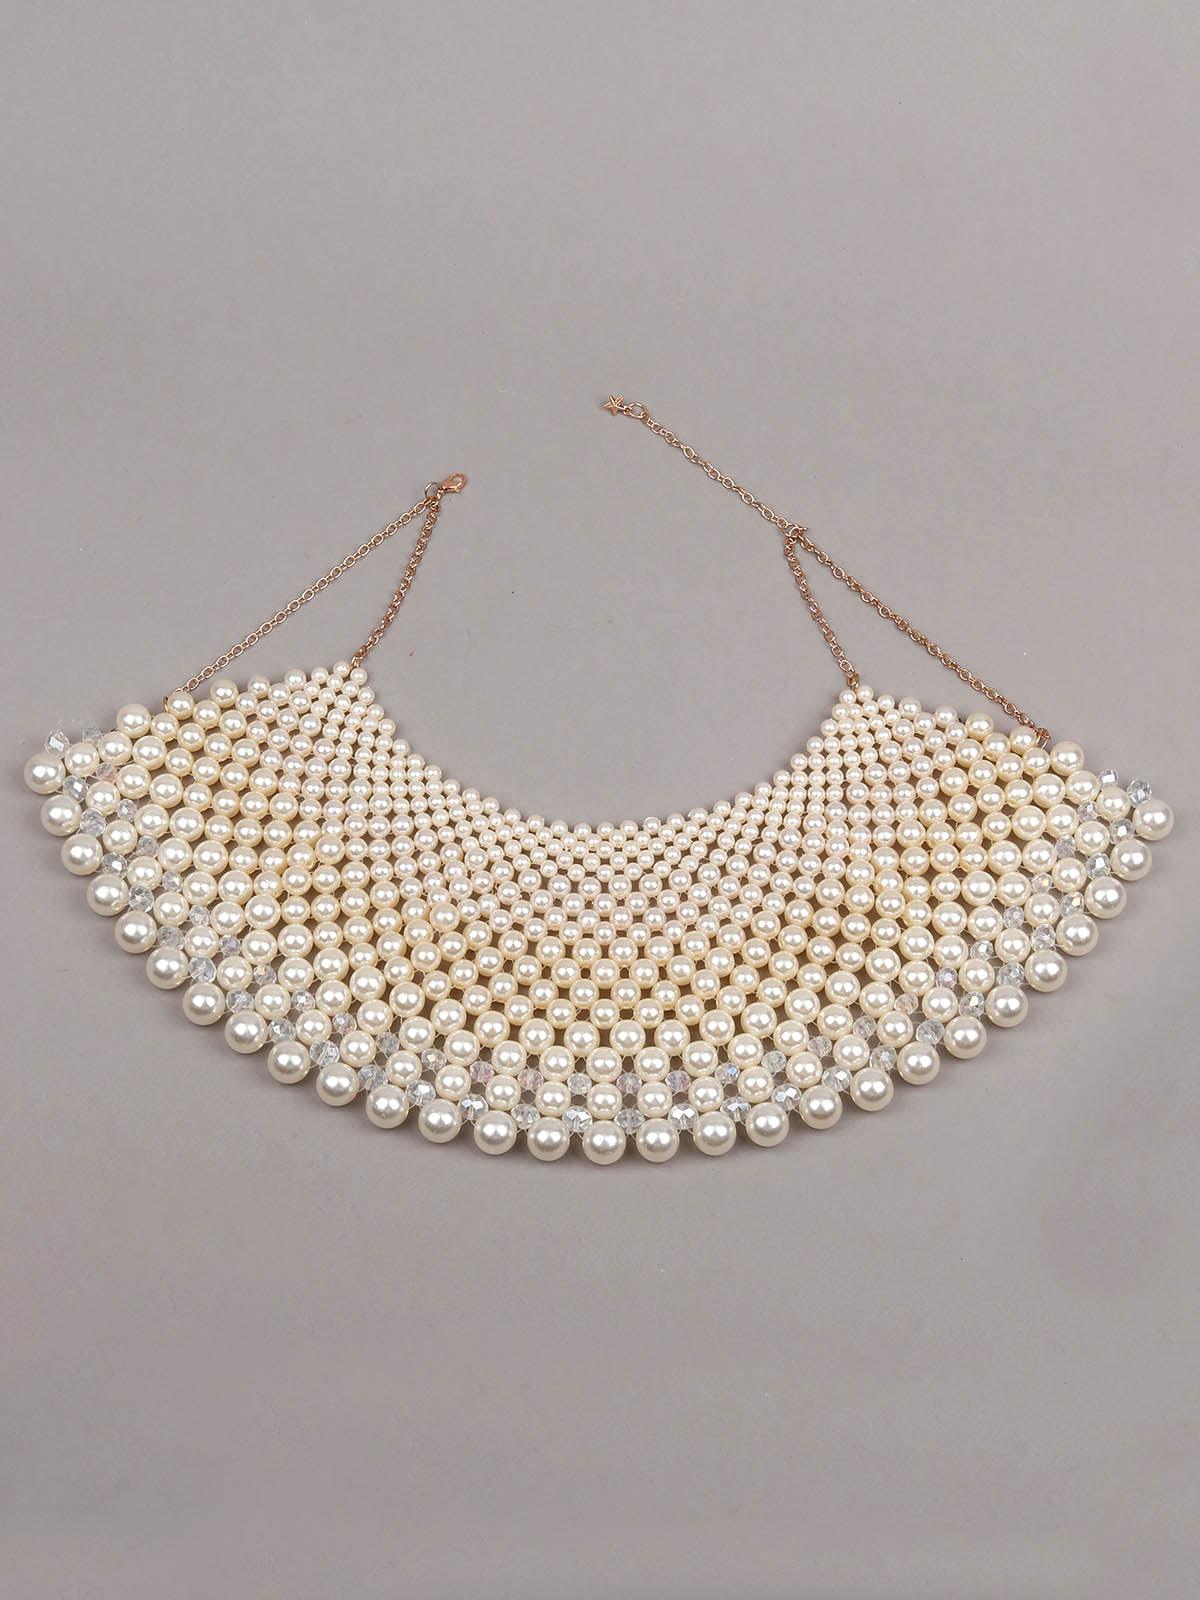 Women's Stylish Beads Collar Necklace - Odette